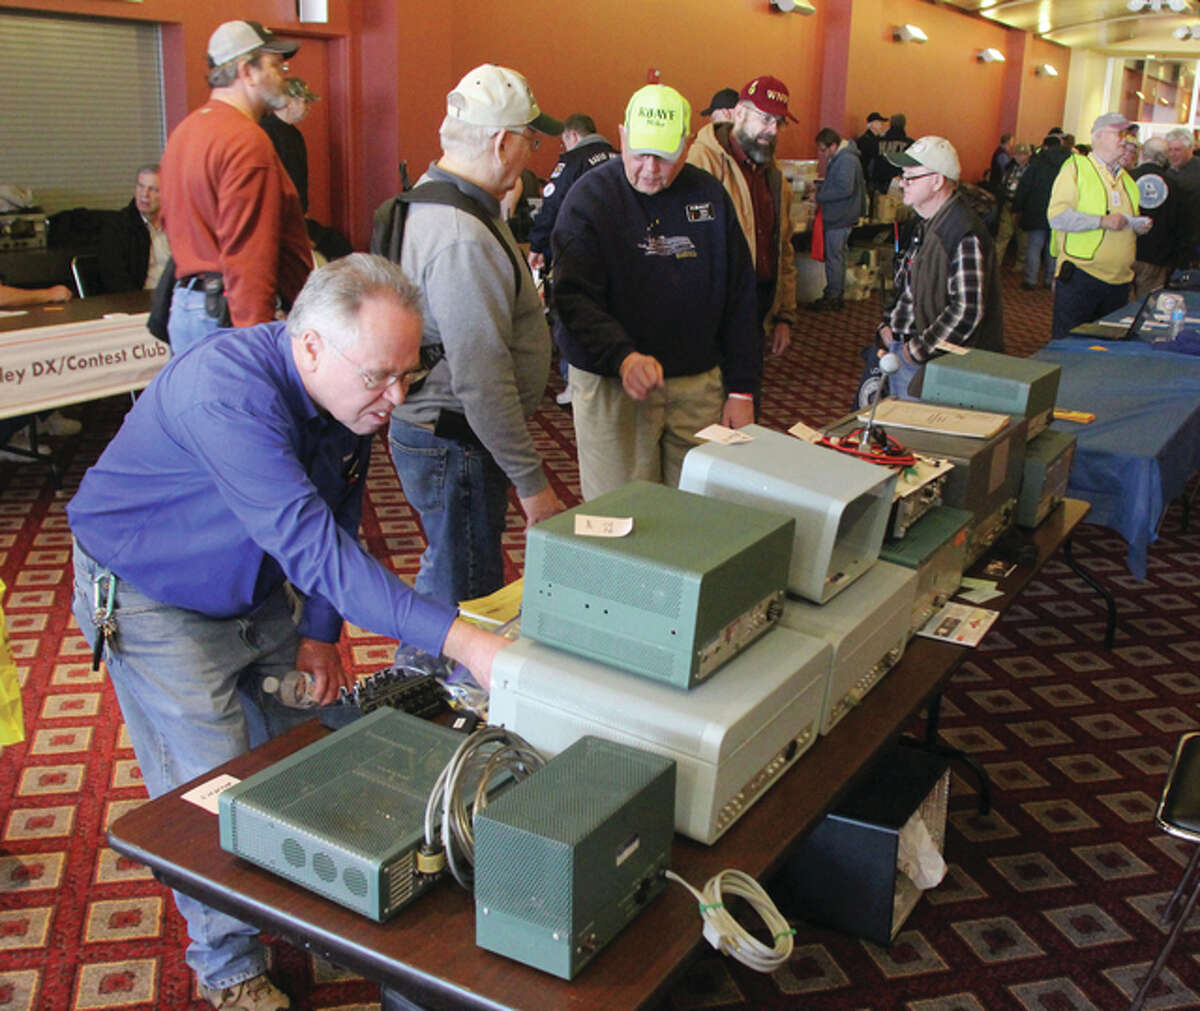 Ham radio enthusiasts look over old and new equipment, or talk at Winterfest, an annual meeting, swap meet and sale for ham radio operators and enthusiasts by the St. Louis and Suburban Radio Club. About 800 attended the event, held at Gateway Center in Collinsville.